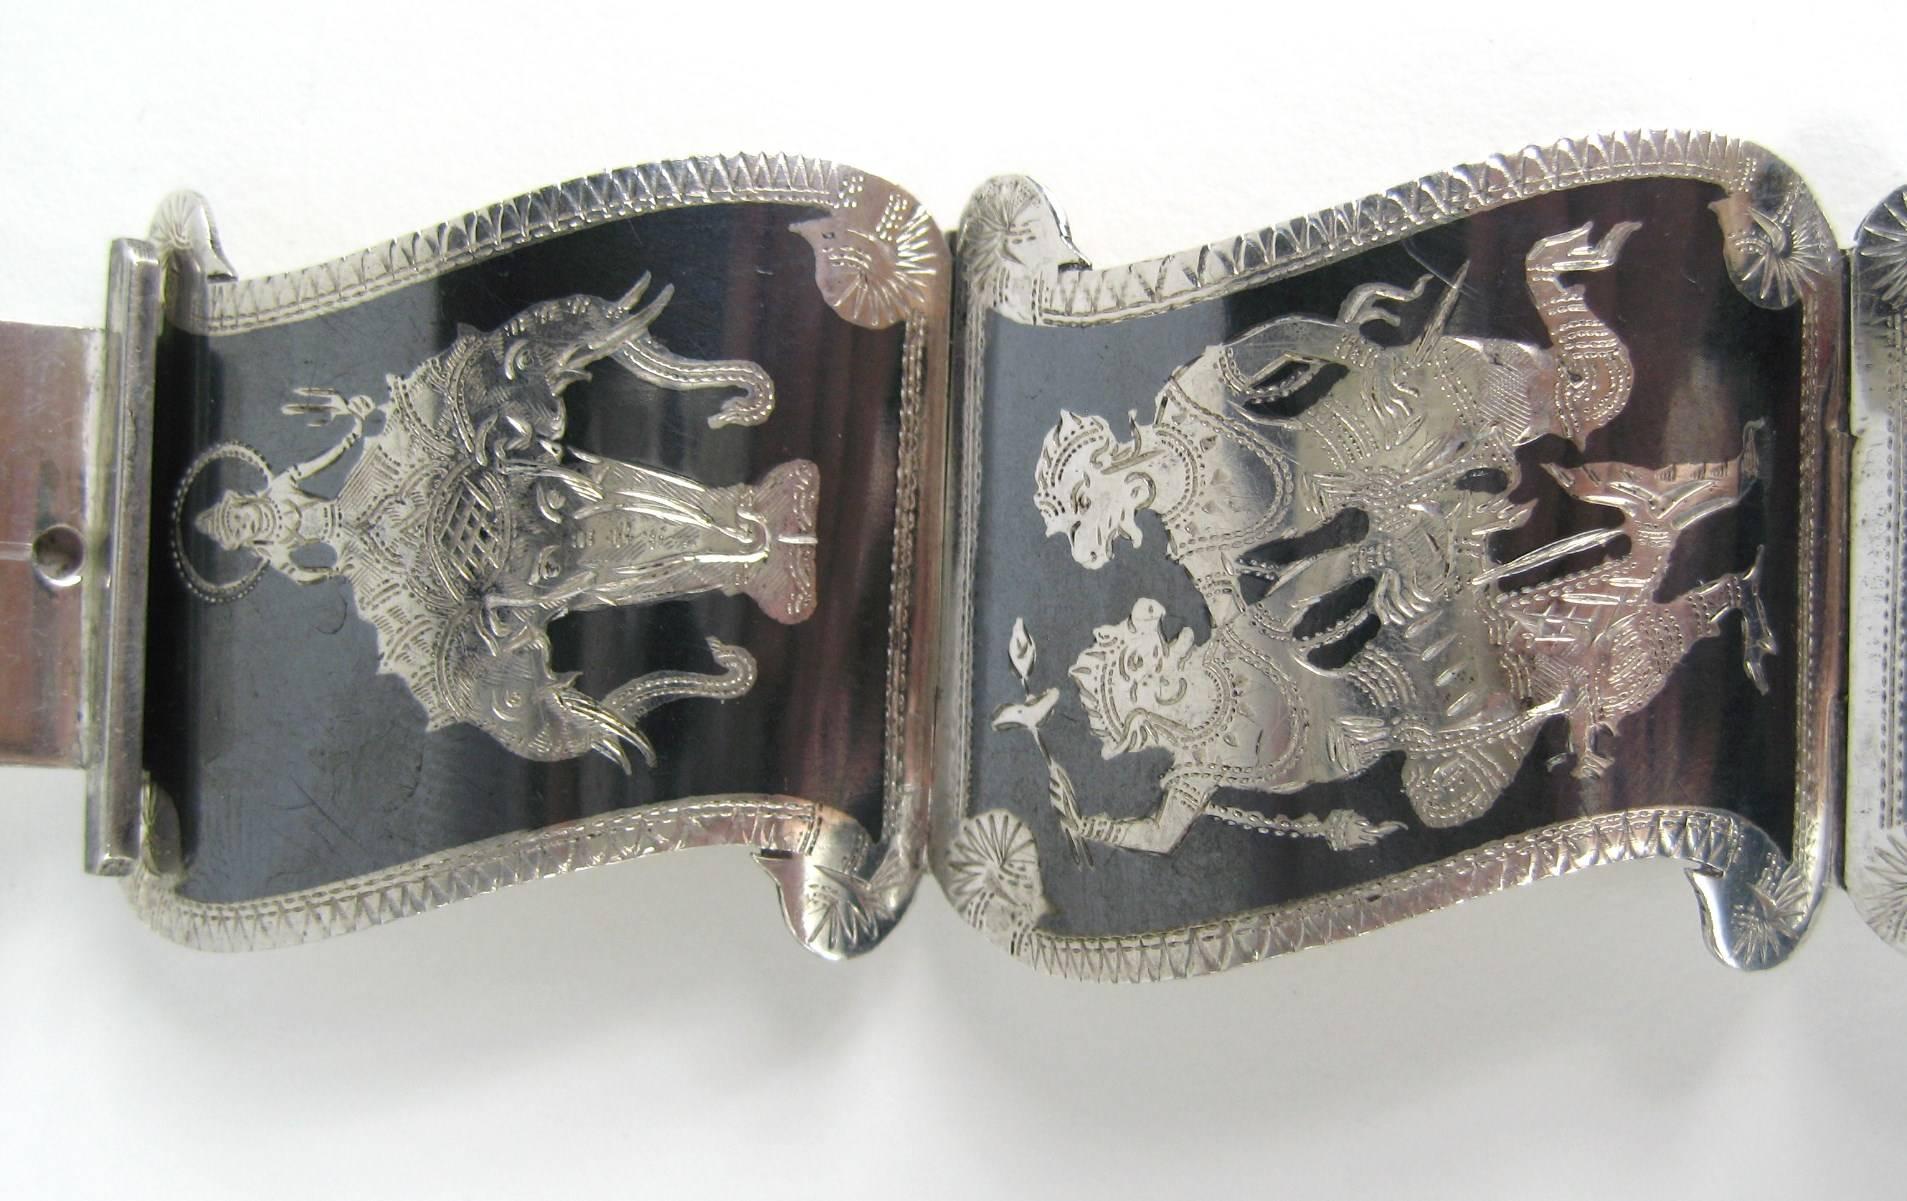 Stunning 5 panels sterling silver bracelet 
Slide in closure, hallmarked sterling silver 
1.25 in wide 
Will fit up to a 7.5 inch wrist 
Any questions please call or hit contact 